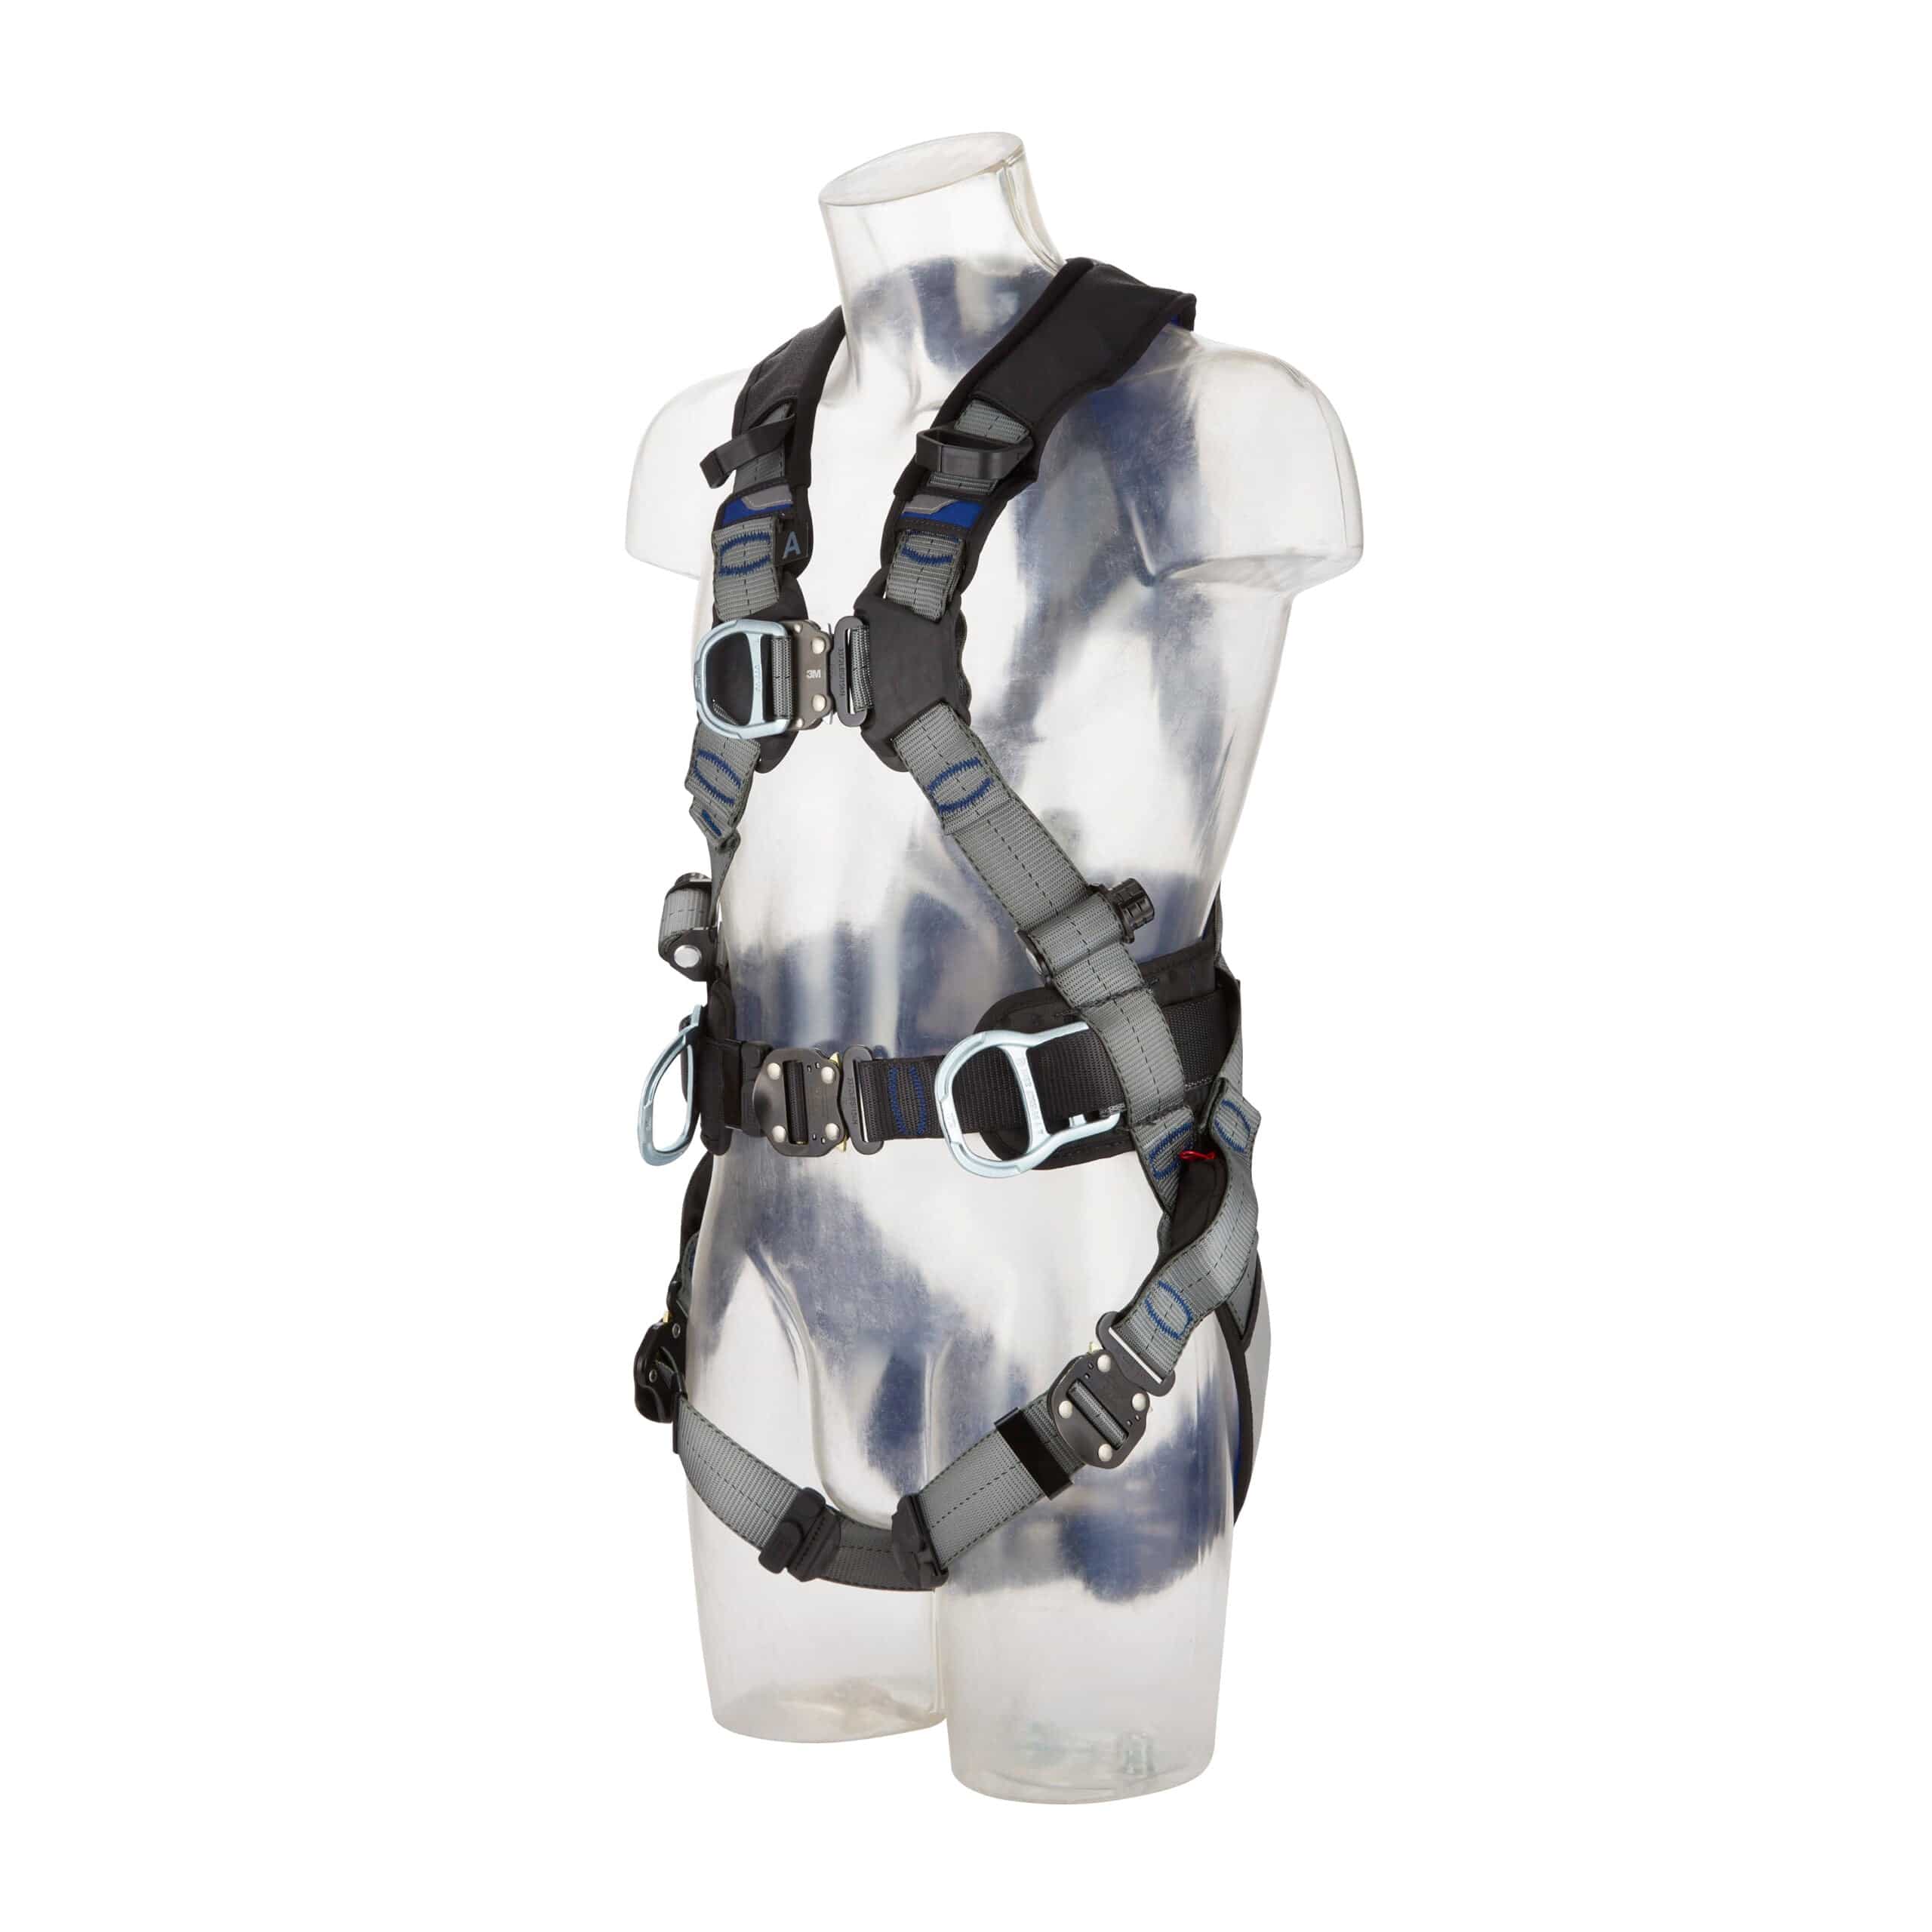 3M DBI SALA ExoFit XE100 Comfort Positioning Safety Harness - SecureHeights